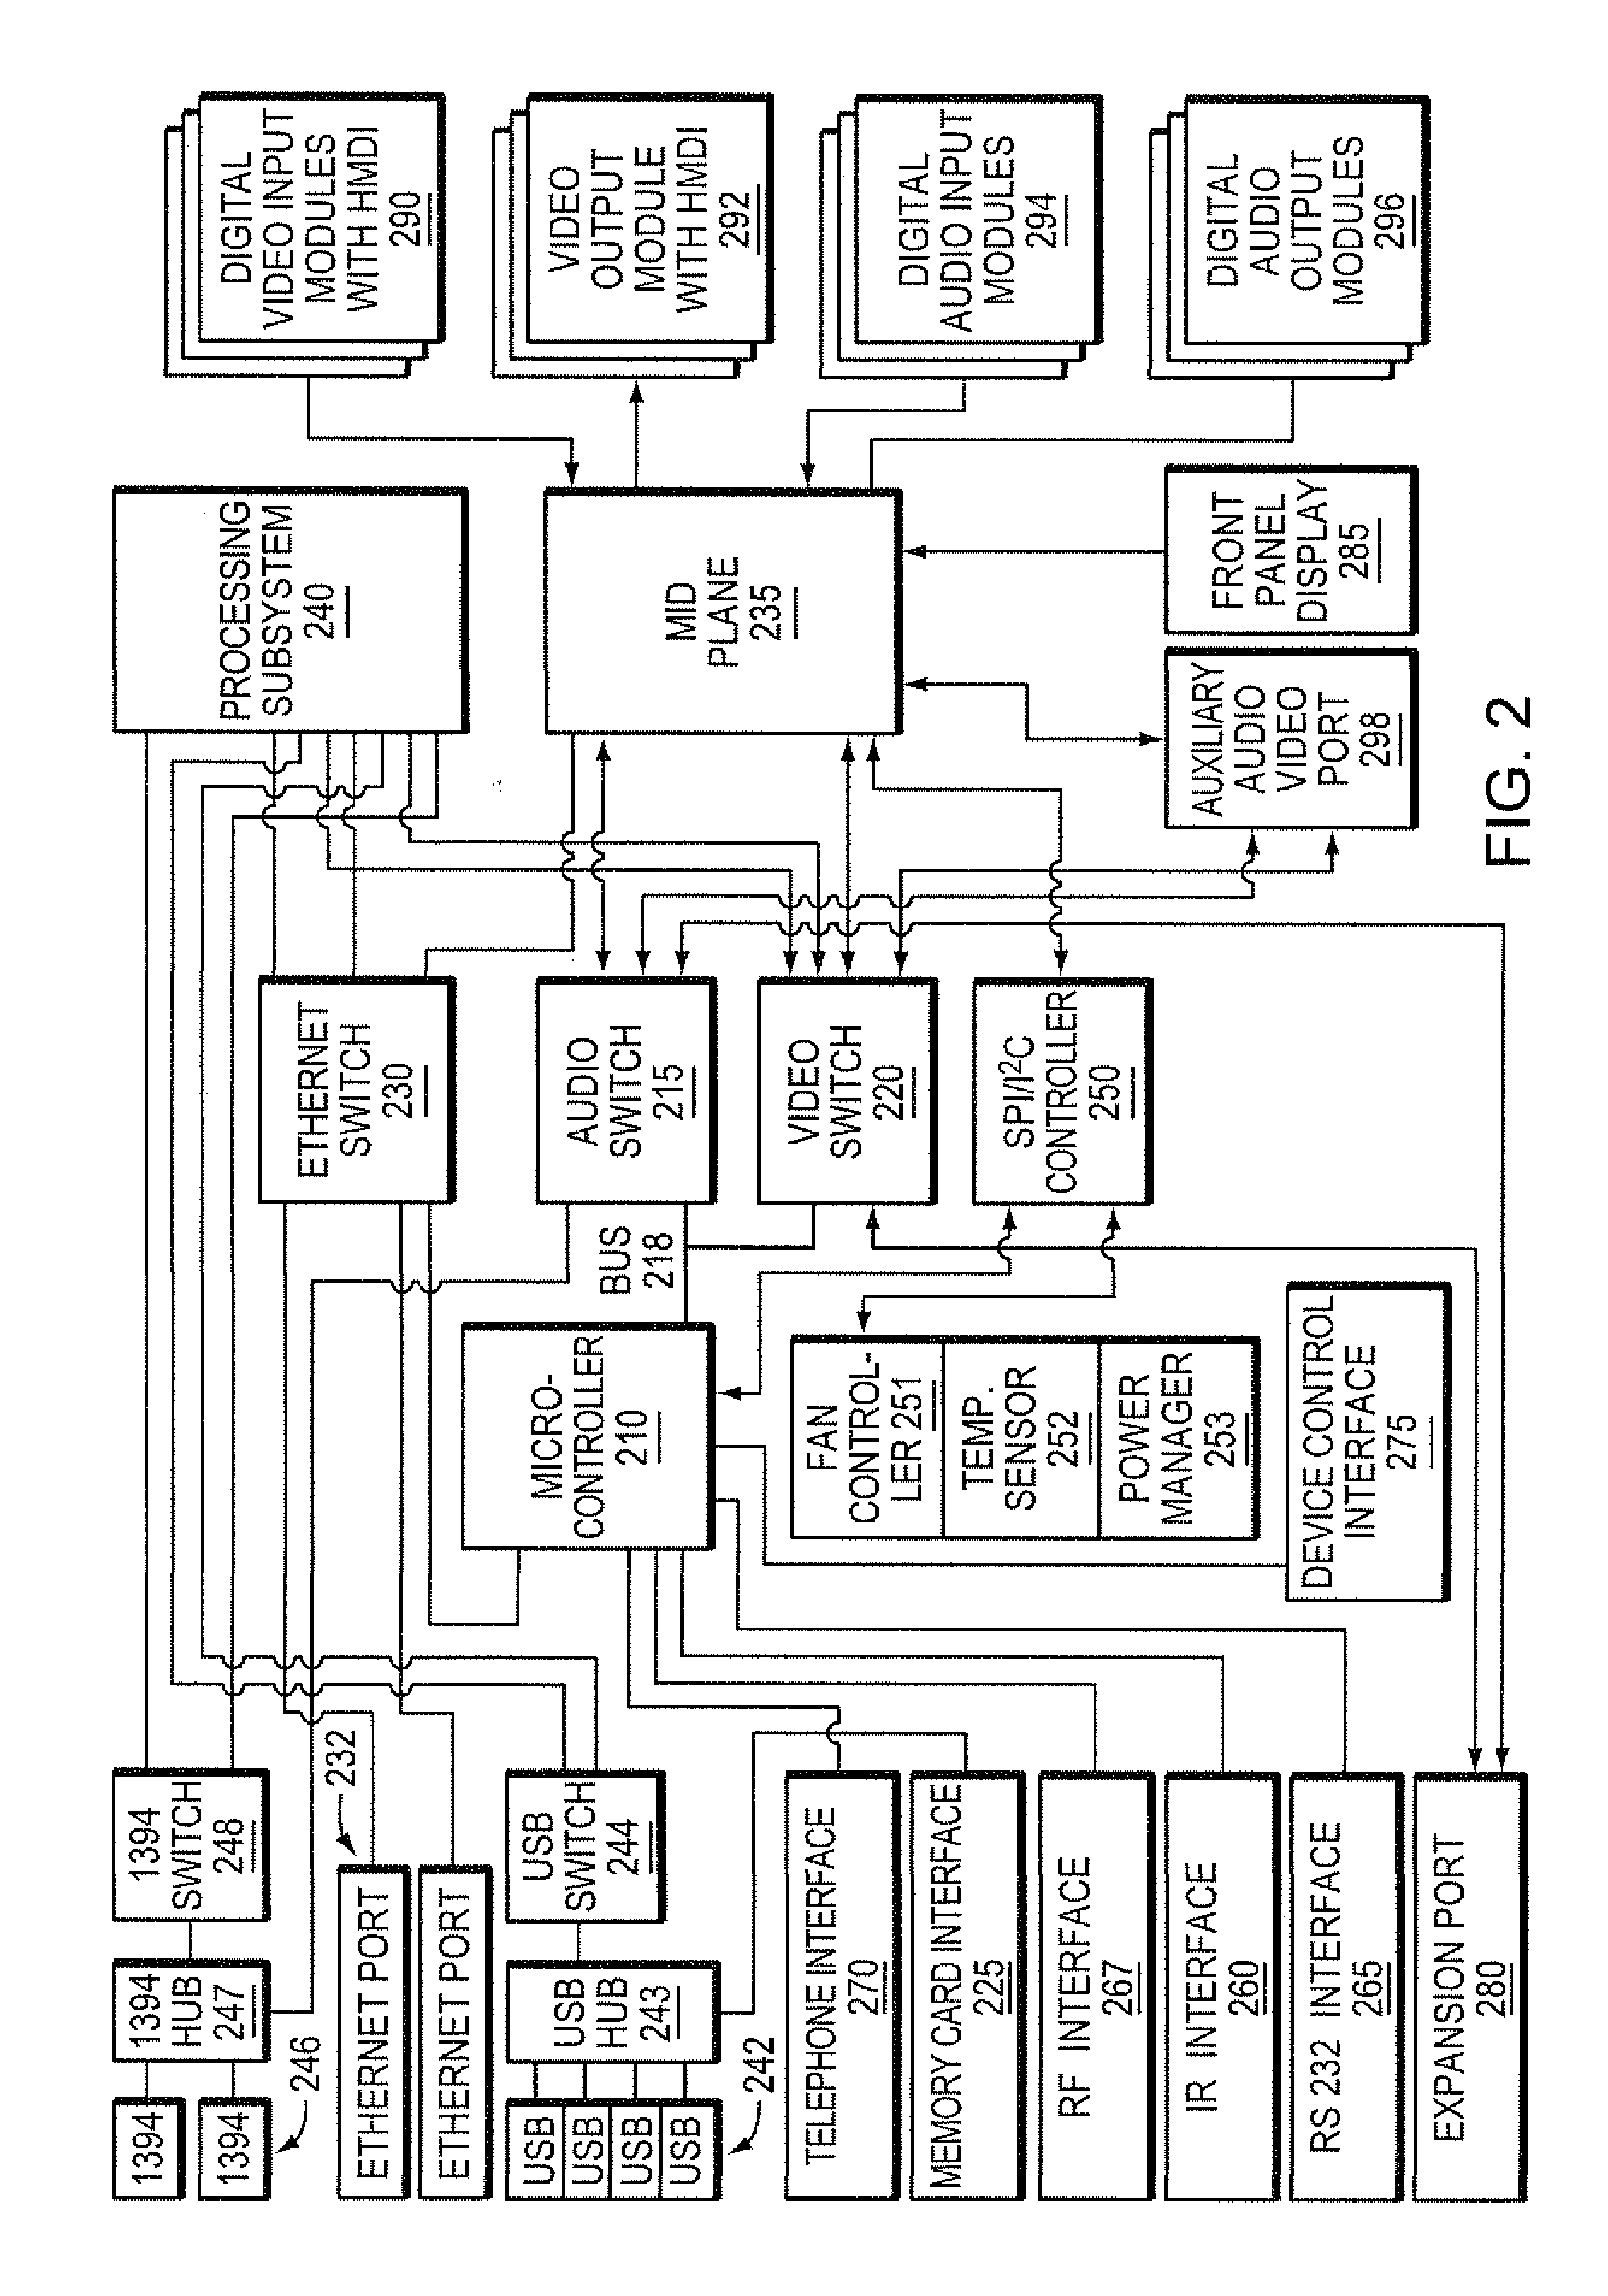 Remote control unit for a programmable multimedia controller